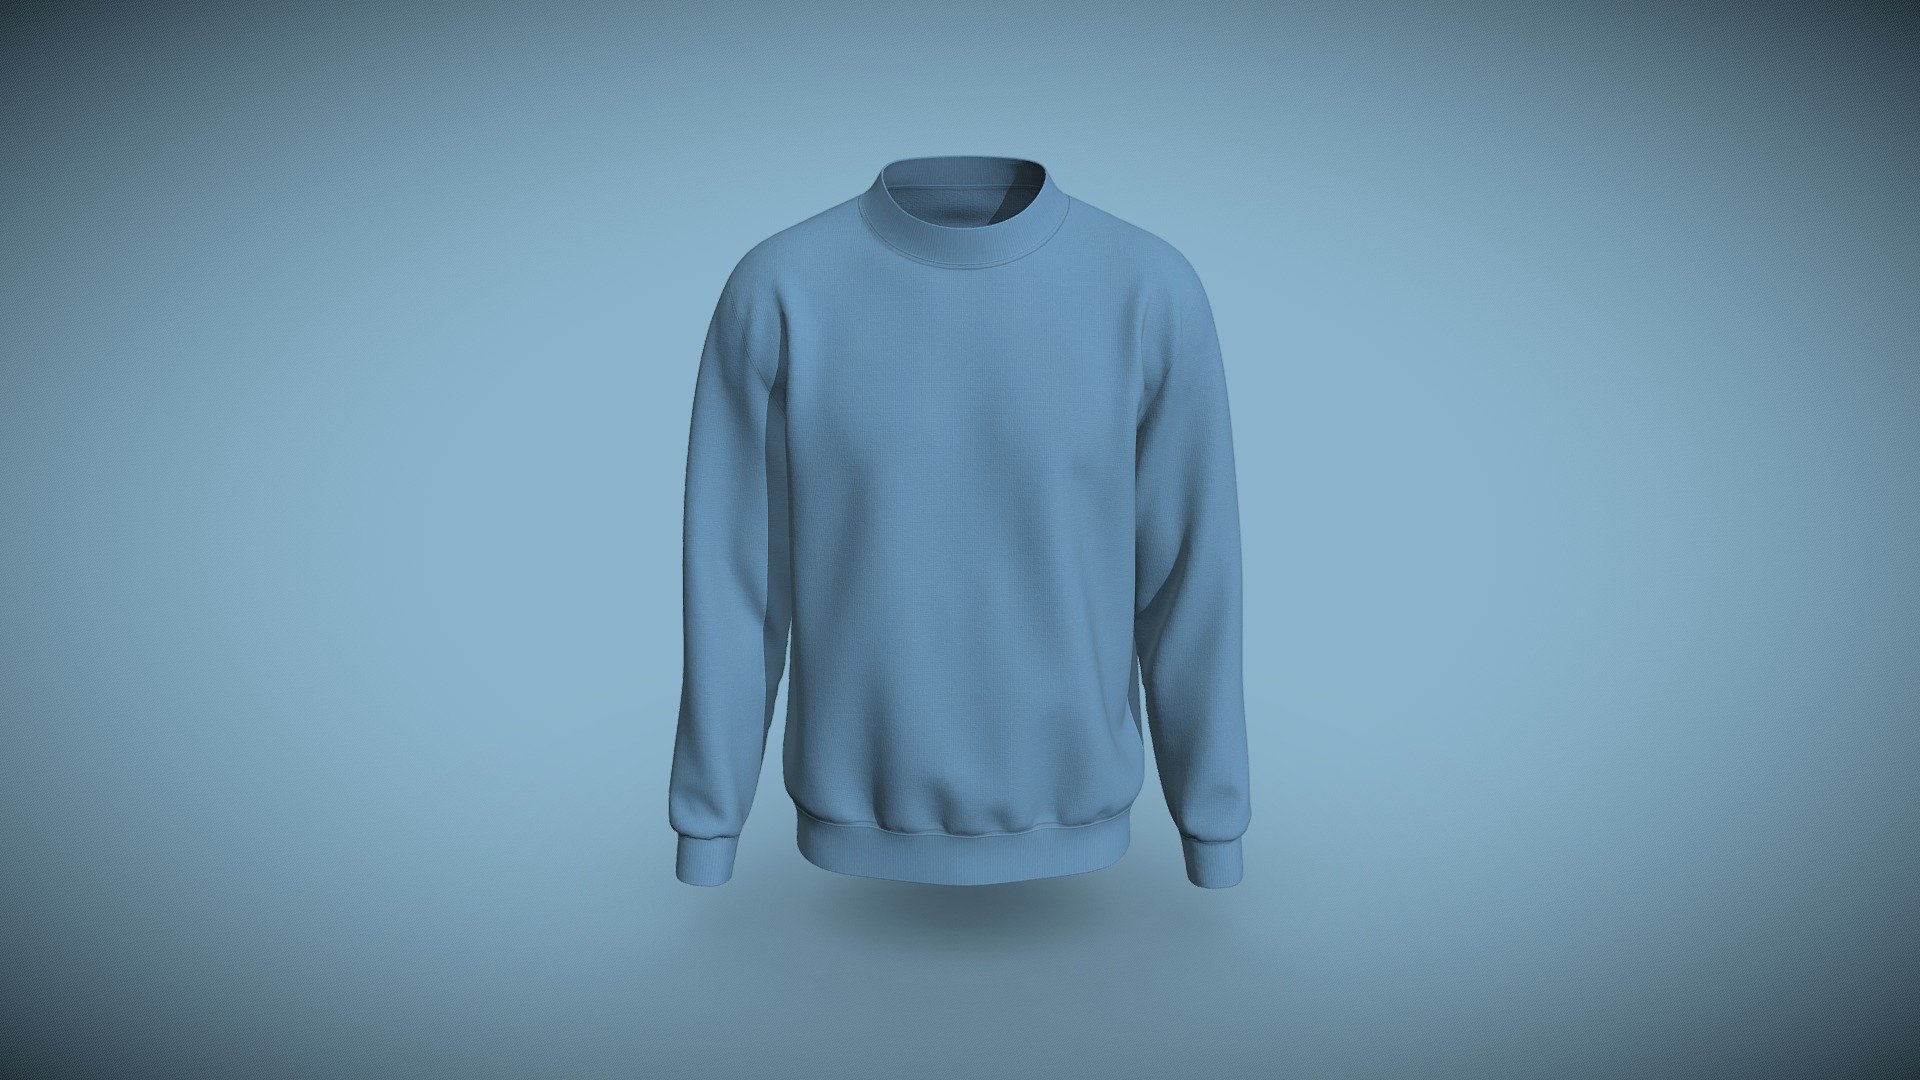 Cloth Title = Premium Sweatshirt for Men &amp; Women  

SKU = DG100141 

Category = Unisex 

Product Type = Sweatshirt 

Cloth Length = Regular 

Body Fit = Relaxed Fit 

Occasion = Outerwear 

Sleeve Style = Set In Sleeve 


Our Services:

3D Apparel Design.

OBJ,FBX,GLTF Making with High/Low Poly.

Fabric Digitalization.

Mockup making.

3D Teck Pack.

Pattern Making.

2D Illustration.

Cloth Animation and 360 Spin Video.


Contact us:- 

Email: info@digitalfashionwear.com 

Website: https://digitalfashionwear.com 


We designed all the types of cloth specially focused on product visualization, e-commerce, fitting, and production. 

We will design: 

T-shirts 

Polo shirts 

Hoodies 

Sweatshirt 

Jackets 

Shirts 

TankTops 

Trousers 

Bras 

Underwear 

Blazer 

Aprons 

Leggings 

and All Fashion items. 





Our goal is to make sure what we provide you, meets your demand 3d model